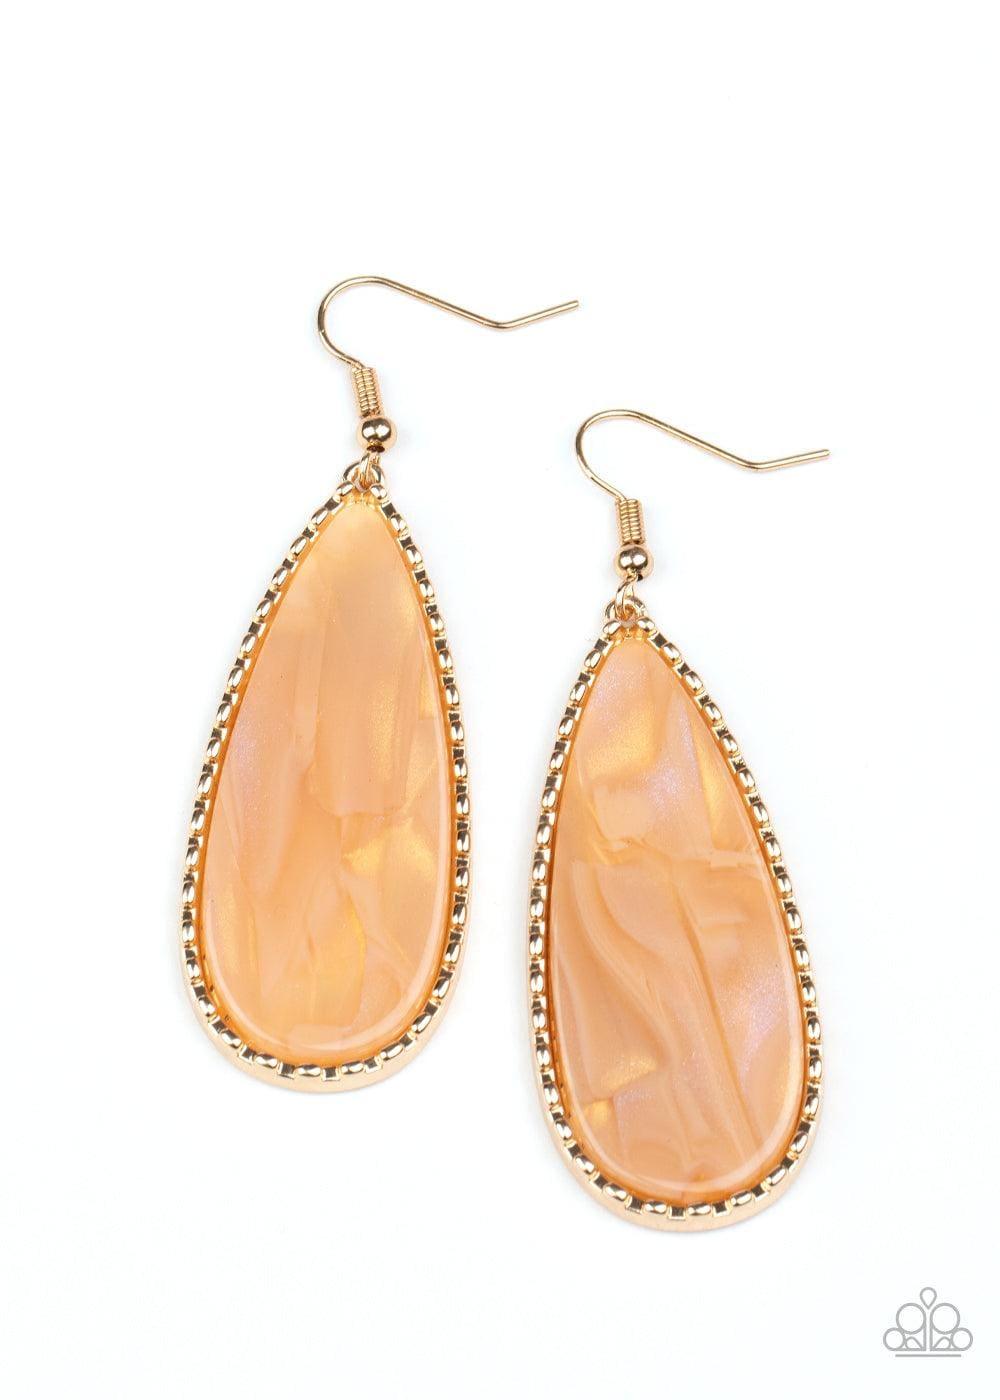 Paparazzi Accessories - Ethereal Eloquence - Gold Earrings - Bling by JessieK